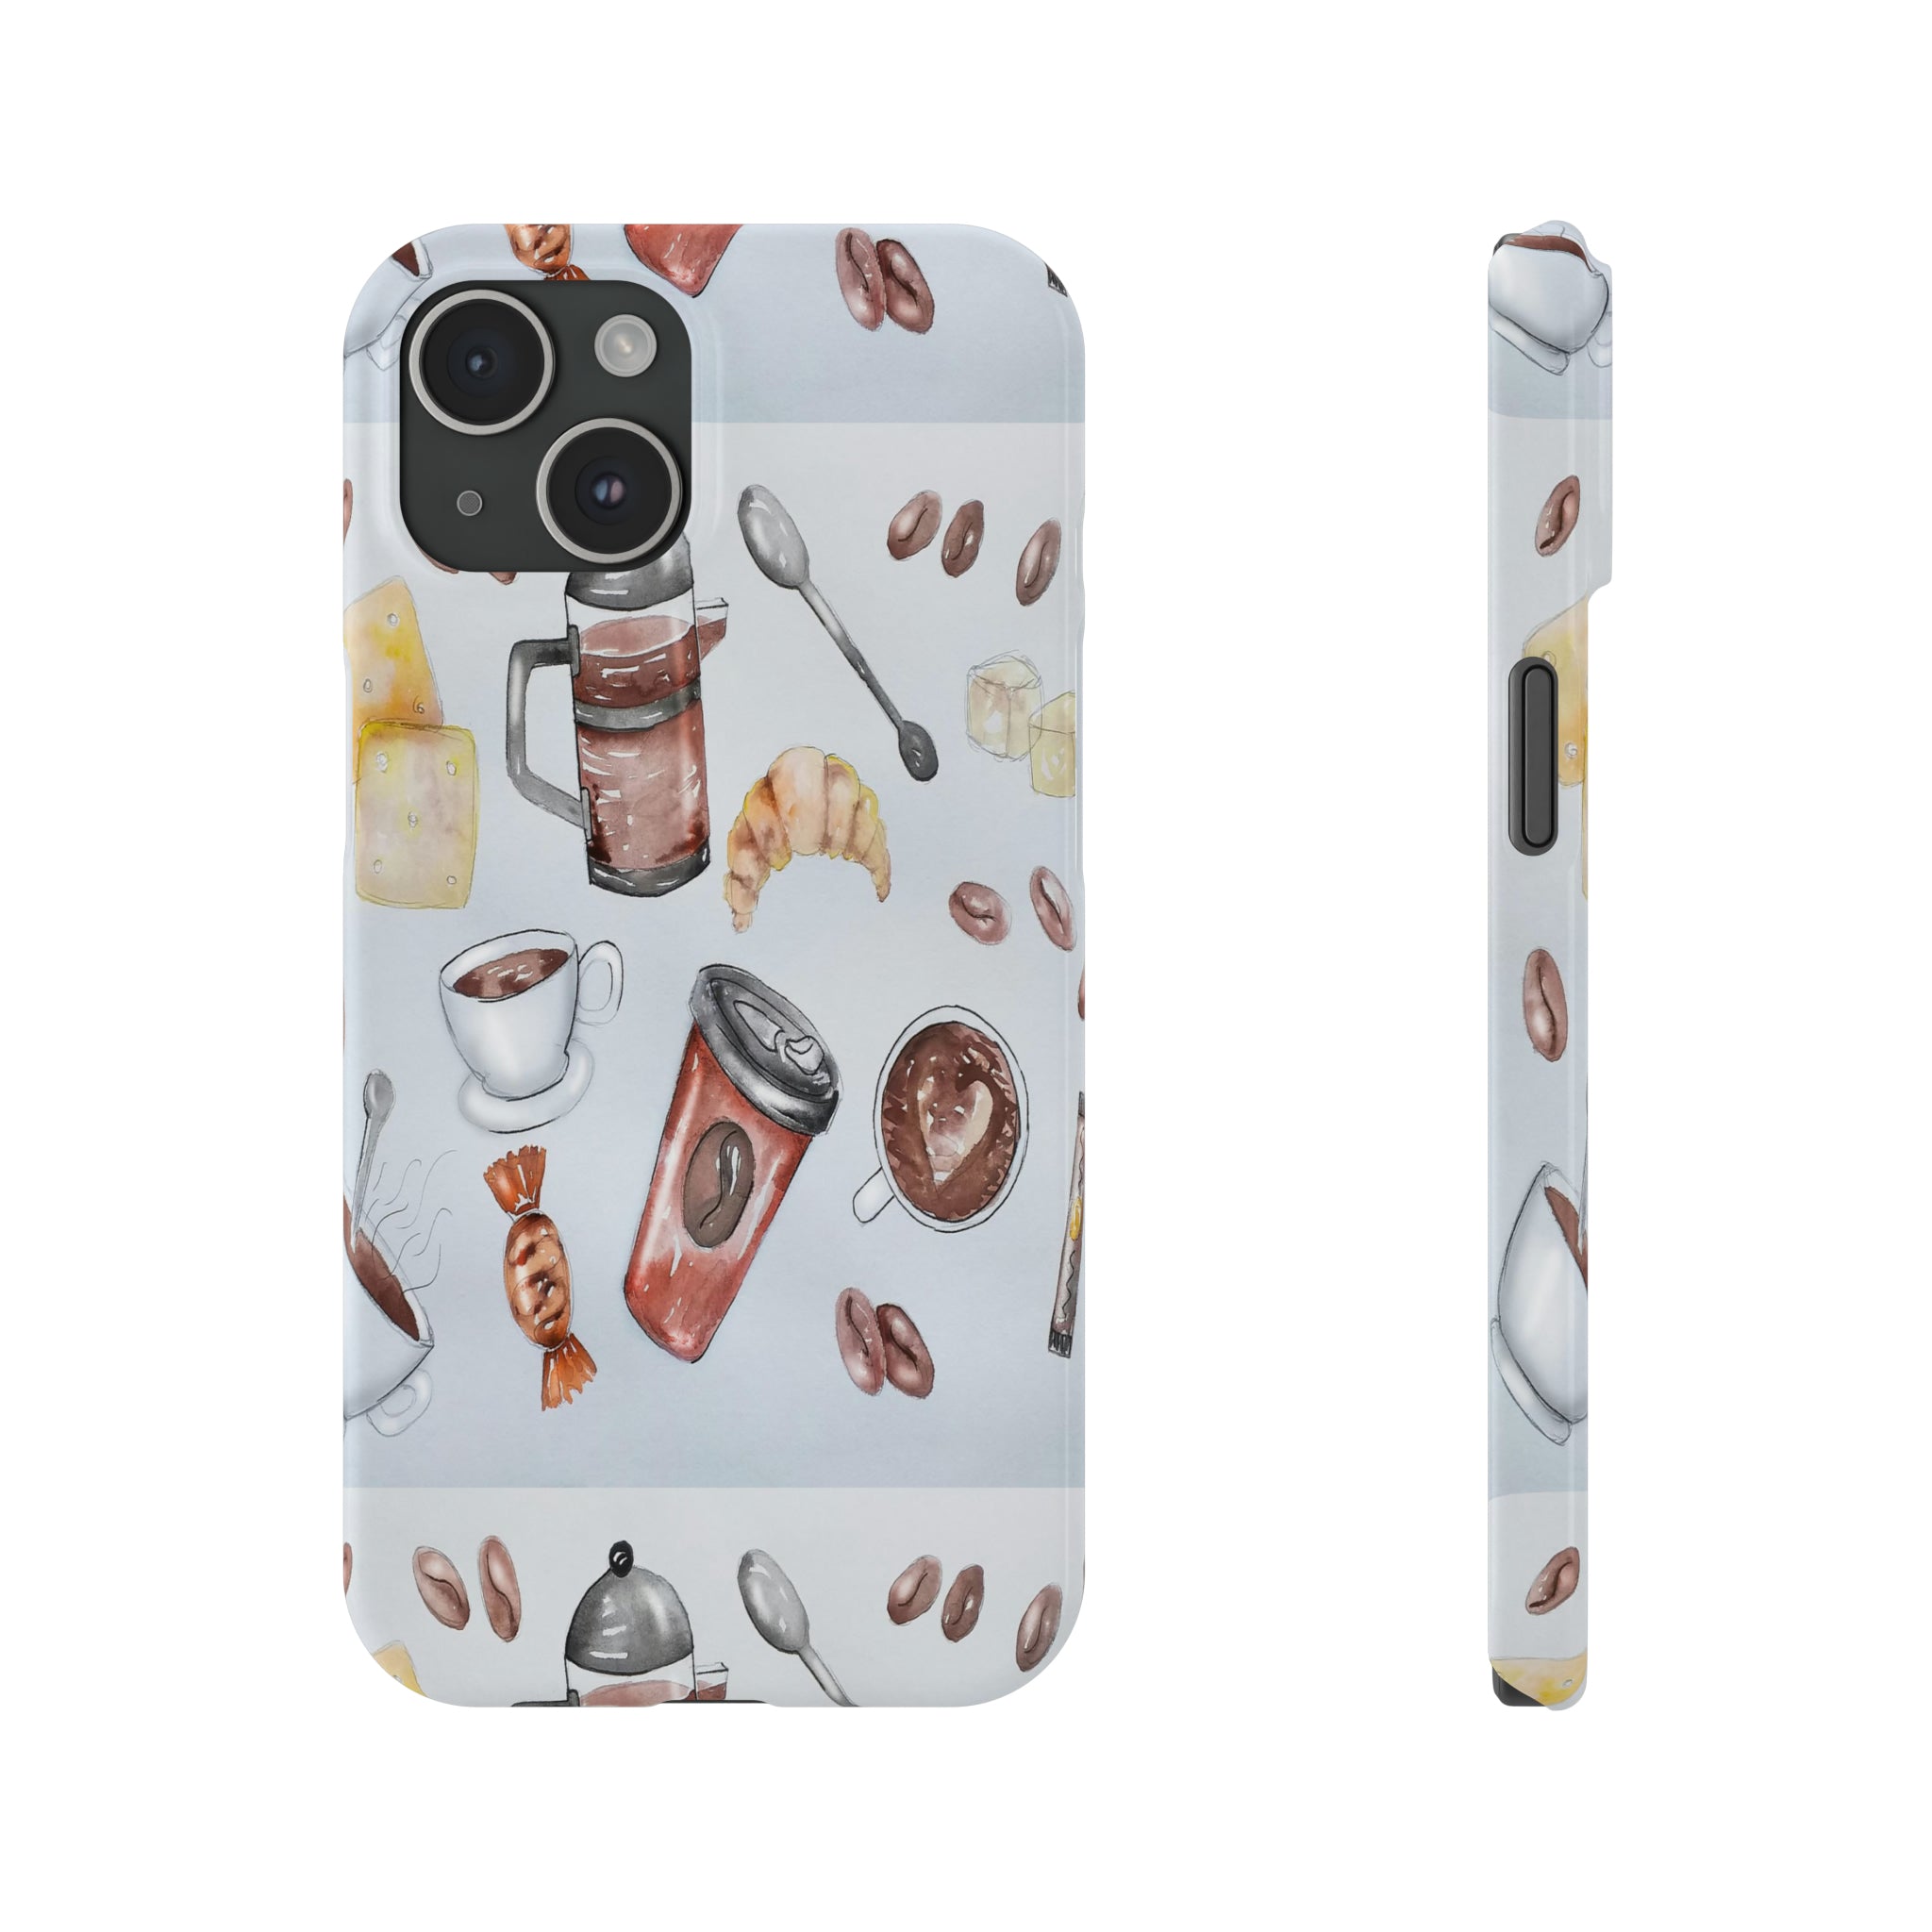 tough iphone slim phone cases with coffee lovers design in a variety of sizes